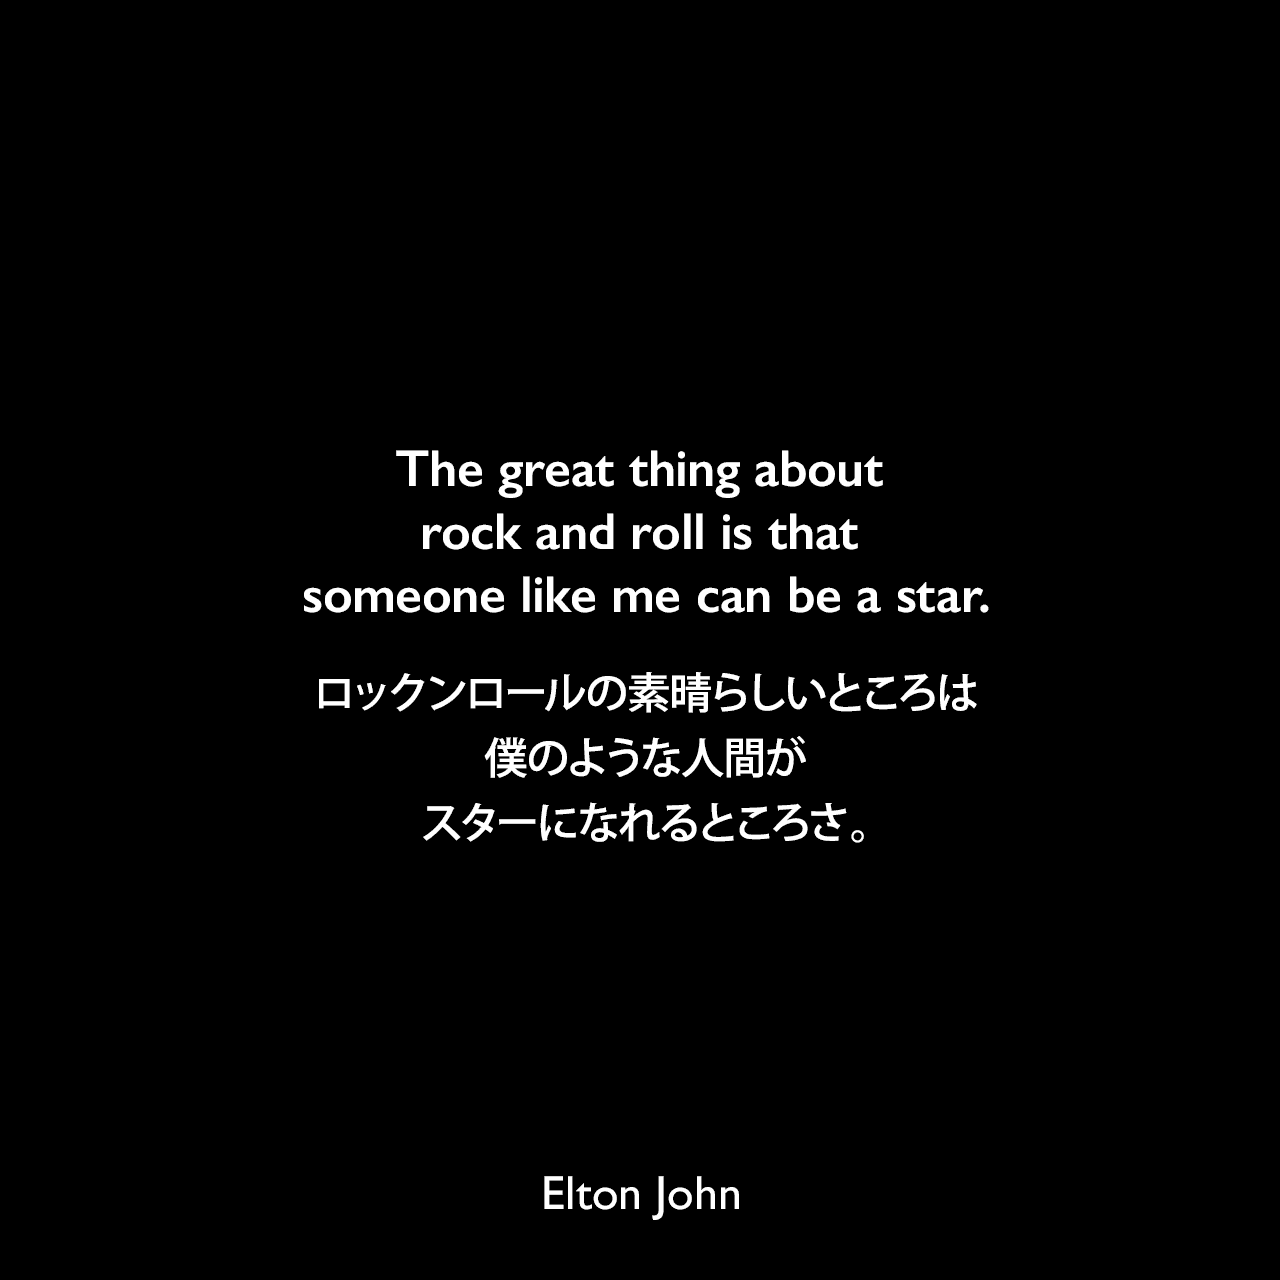 The great thing about rock and roll is that someone like me can be a star.ロックンロールの素晴らしいところは、僕のような人間がスターになれるところさ。Elton John